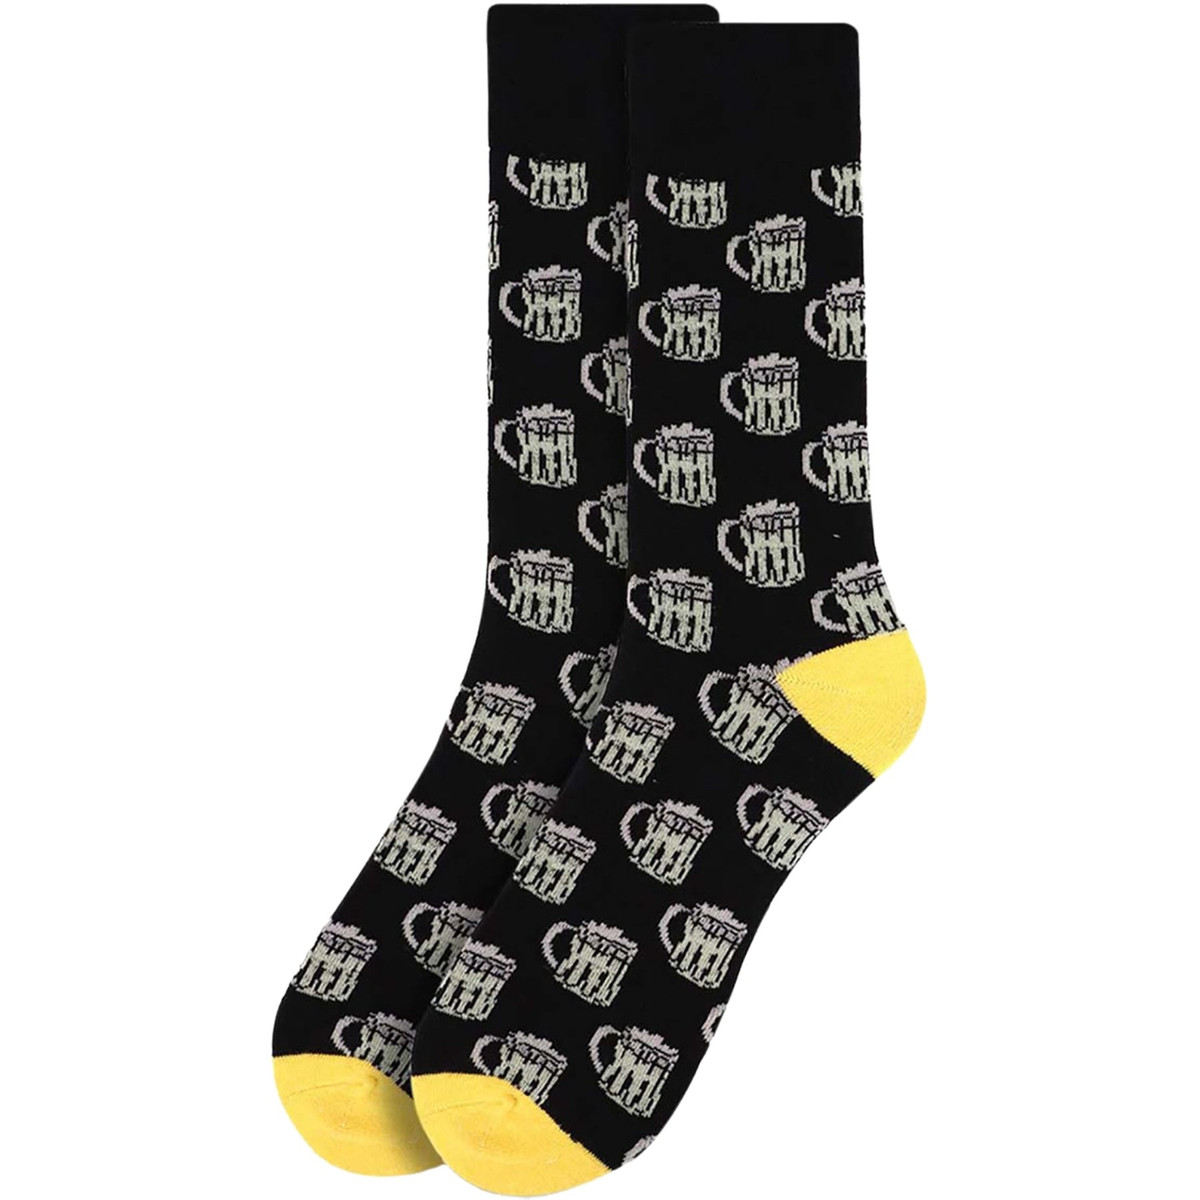 Men's Cheers to the Day Mugs Pattern Crew Novelty Socks - Black